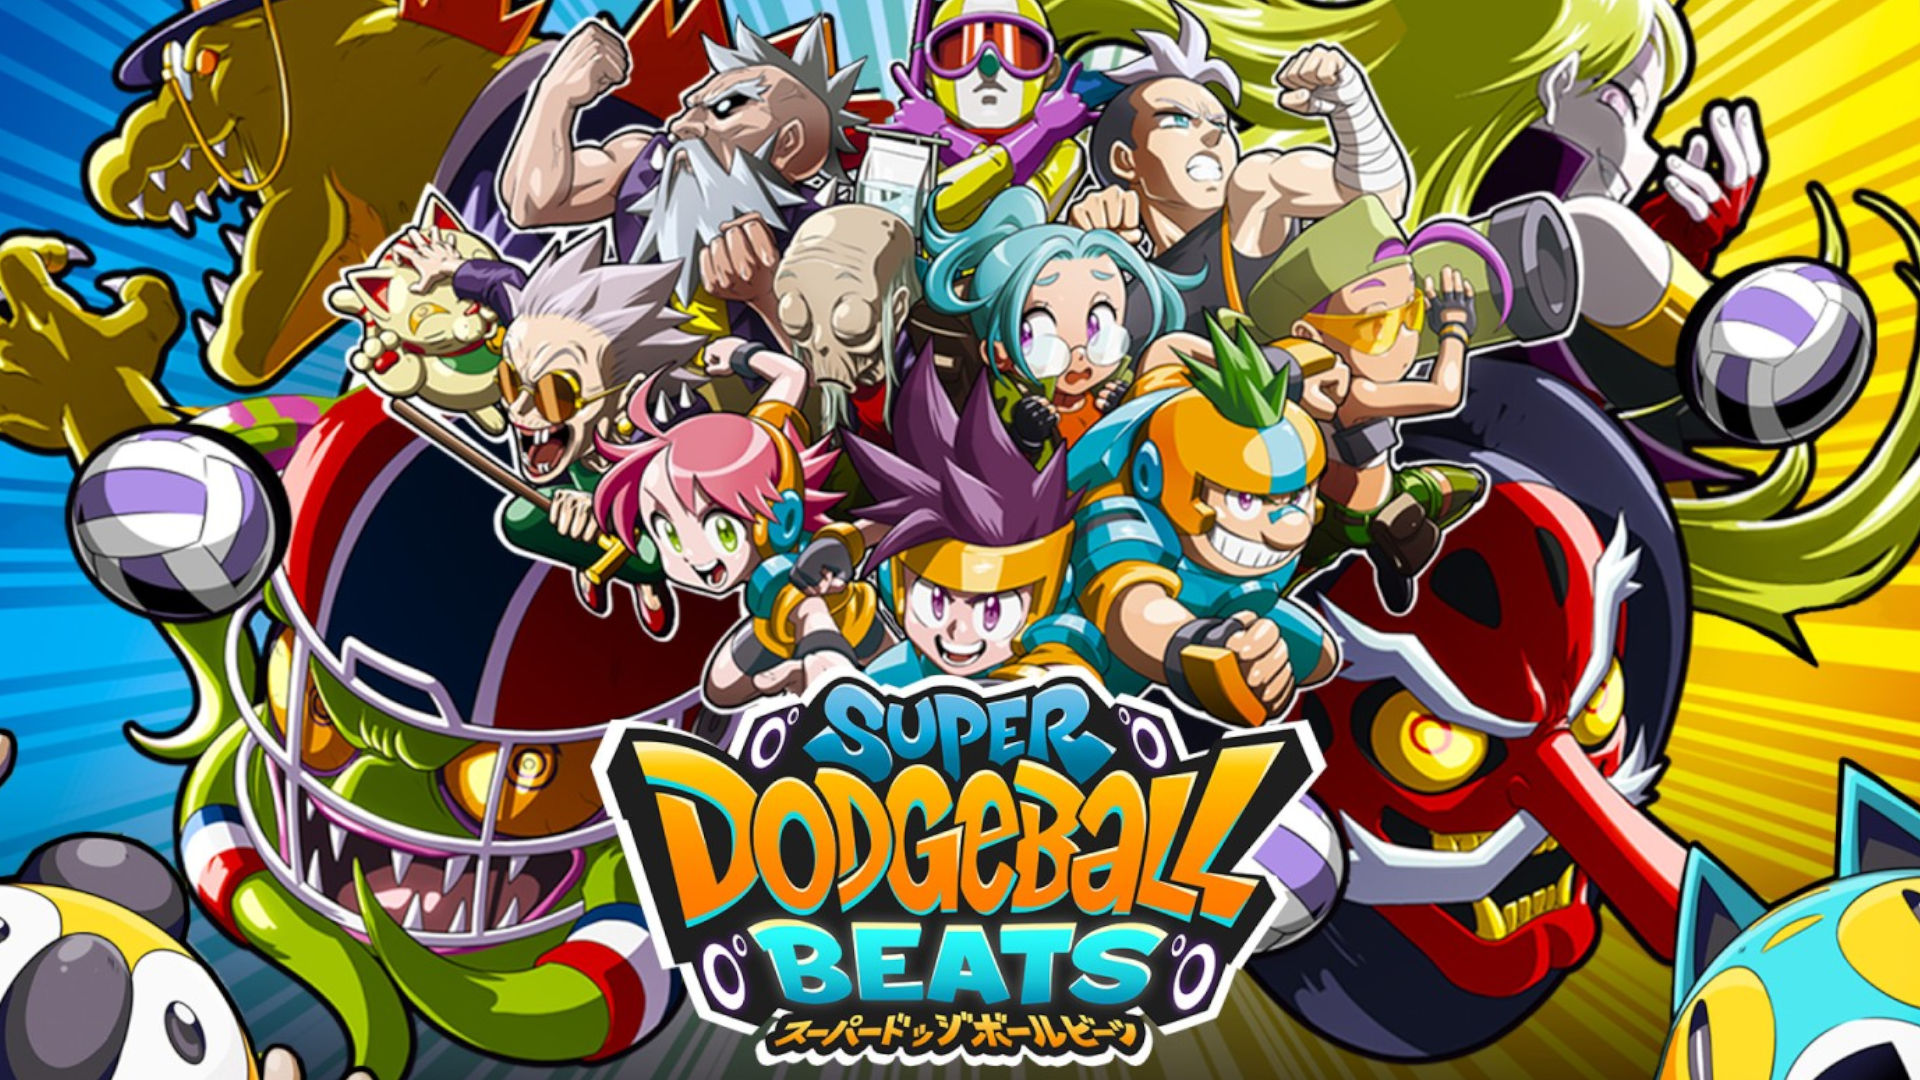 Cover art for Super Dodgeball Beats featuring all the crazy characters from the game